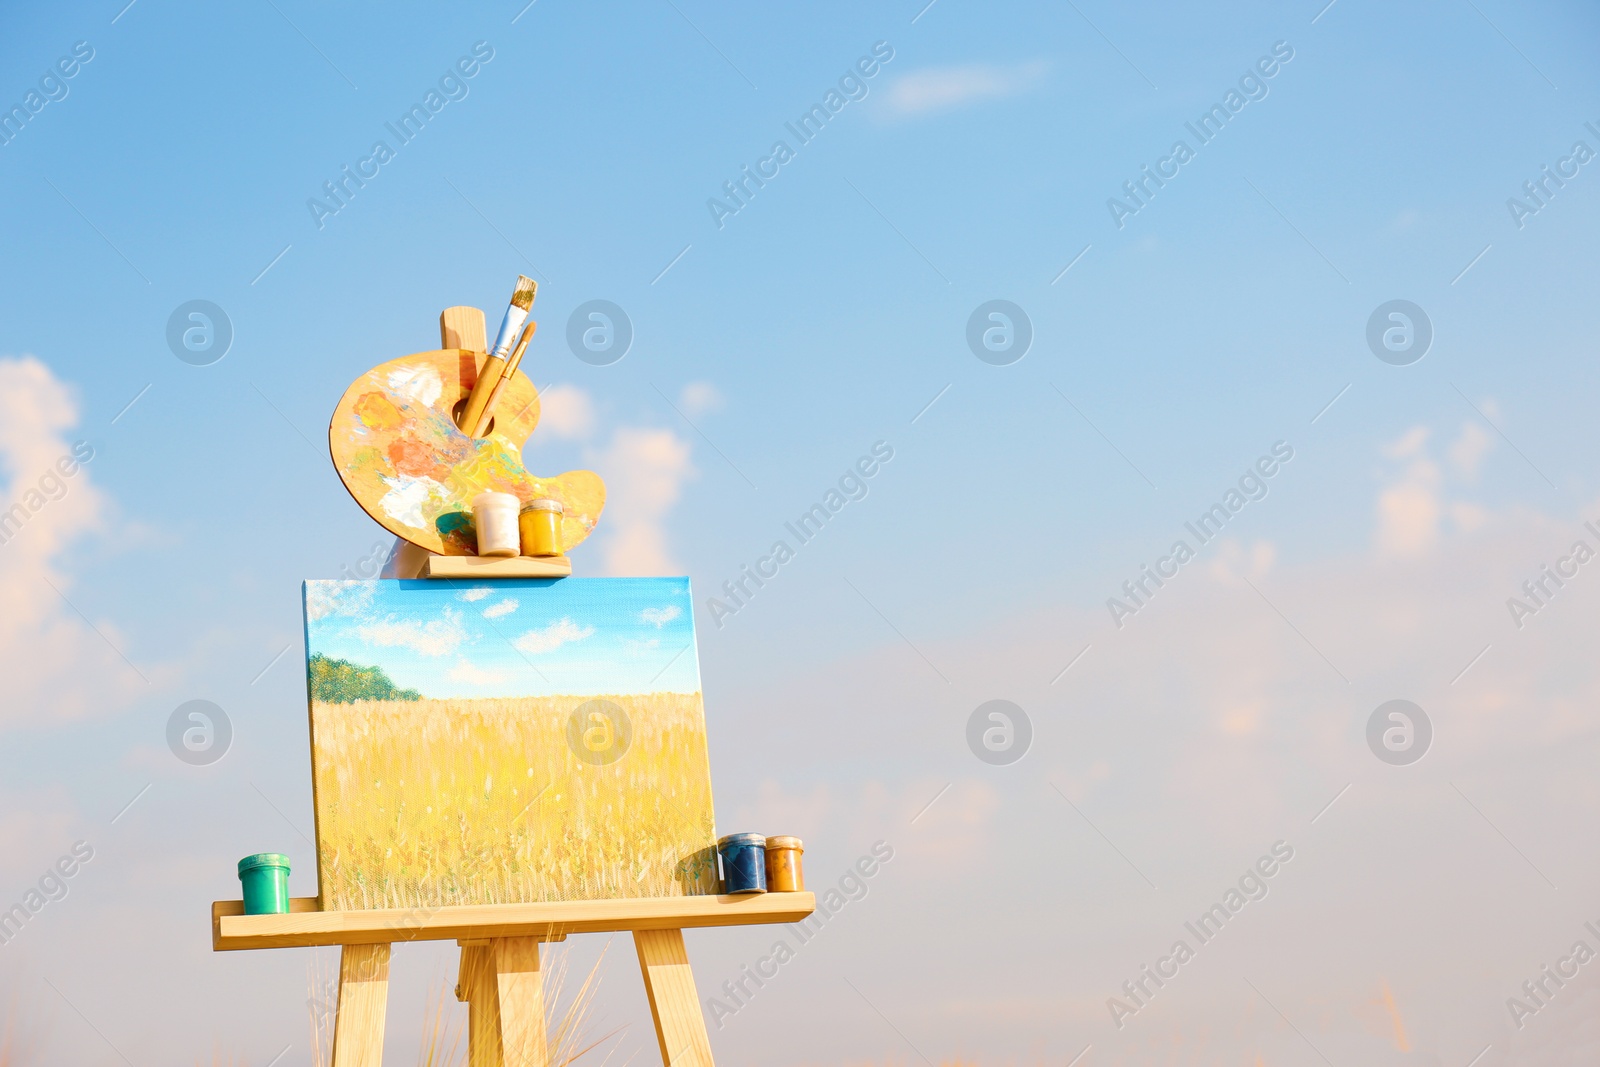 Photo of Wooden easel with beautiful picture and painting equipment against blue sky. Space for text